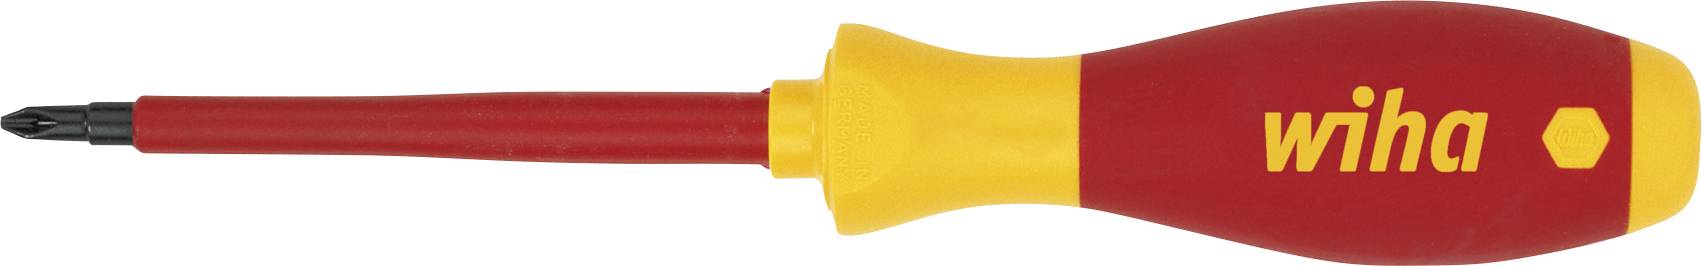 SCREWDRIVER VDE PH3 T49142-3 By CK TOOLS